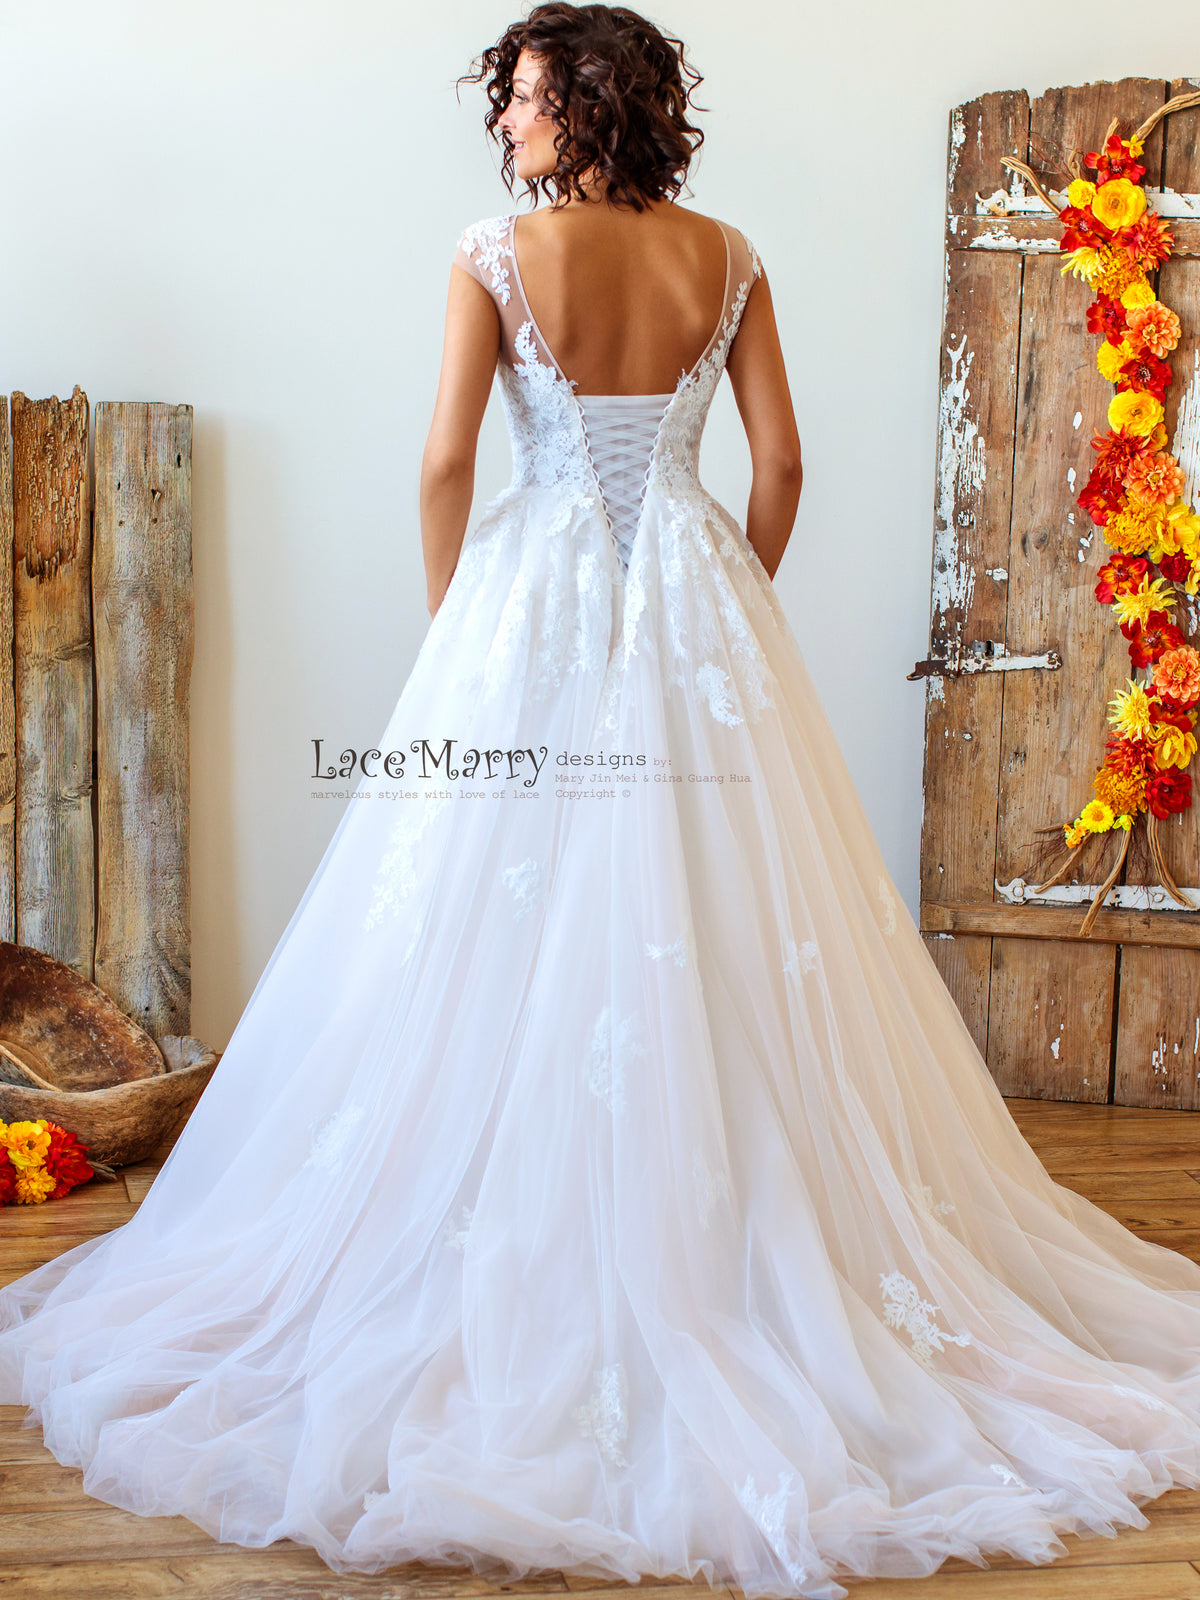 Princess Wedding Dress with Lace Straps and Corset Back